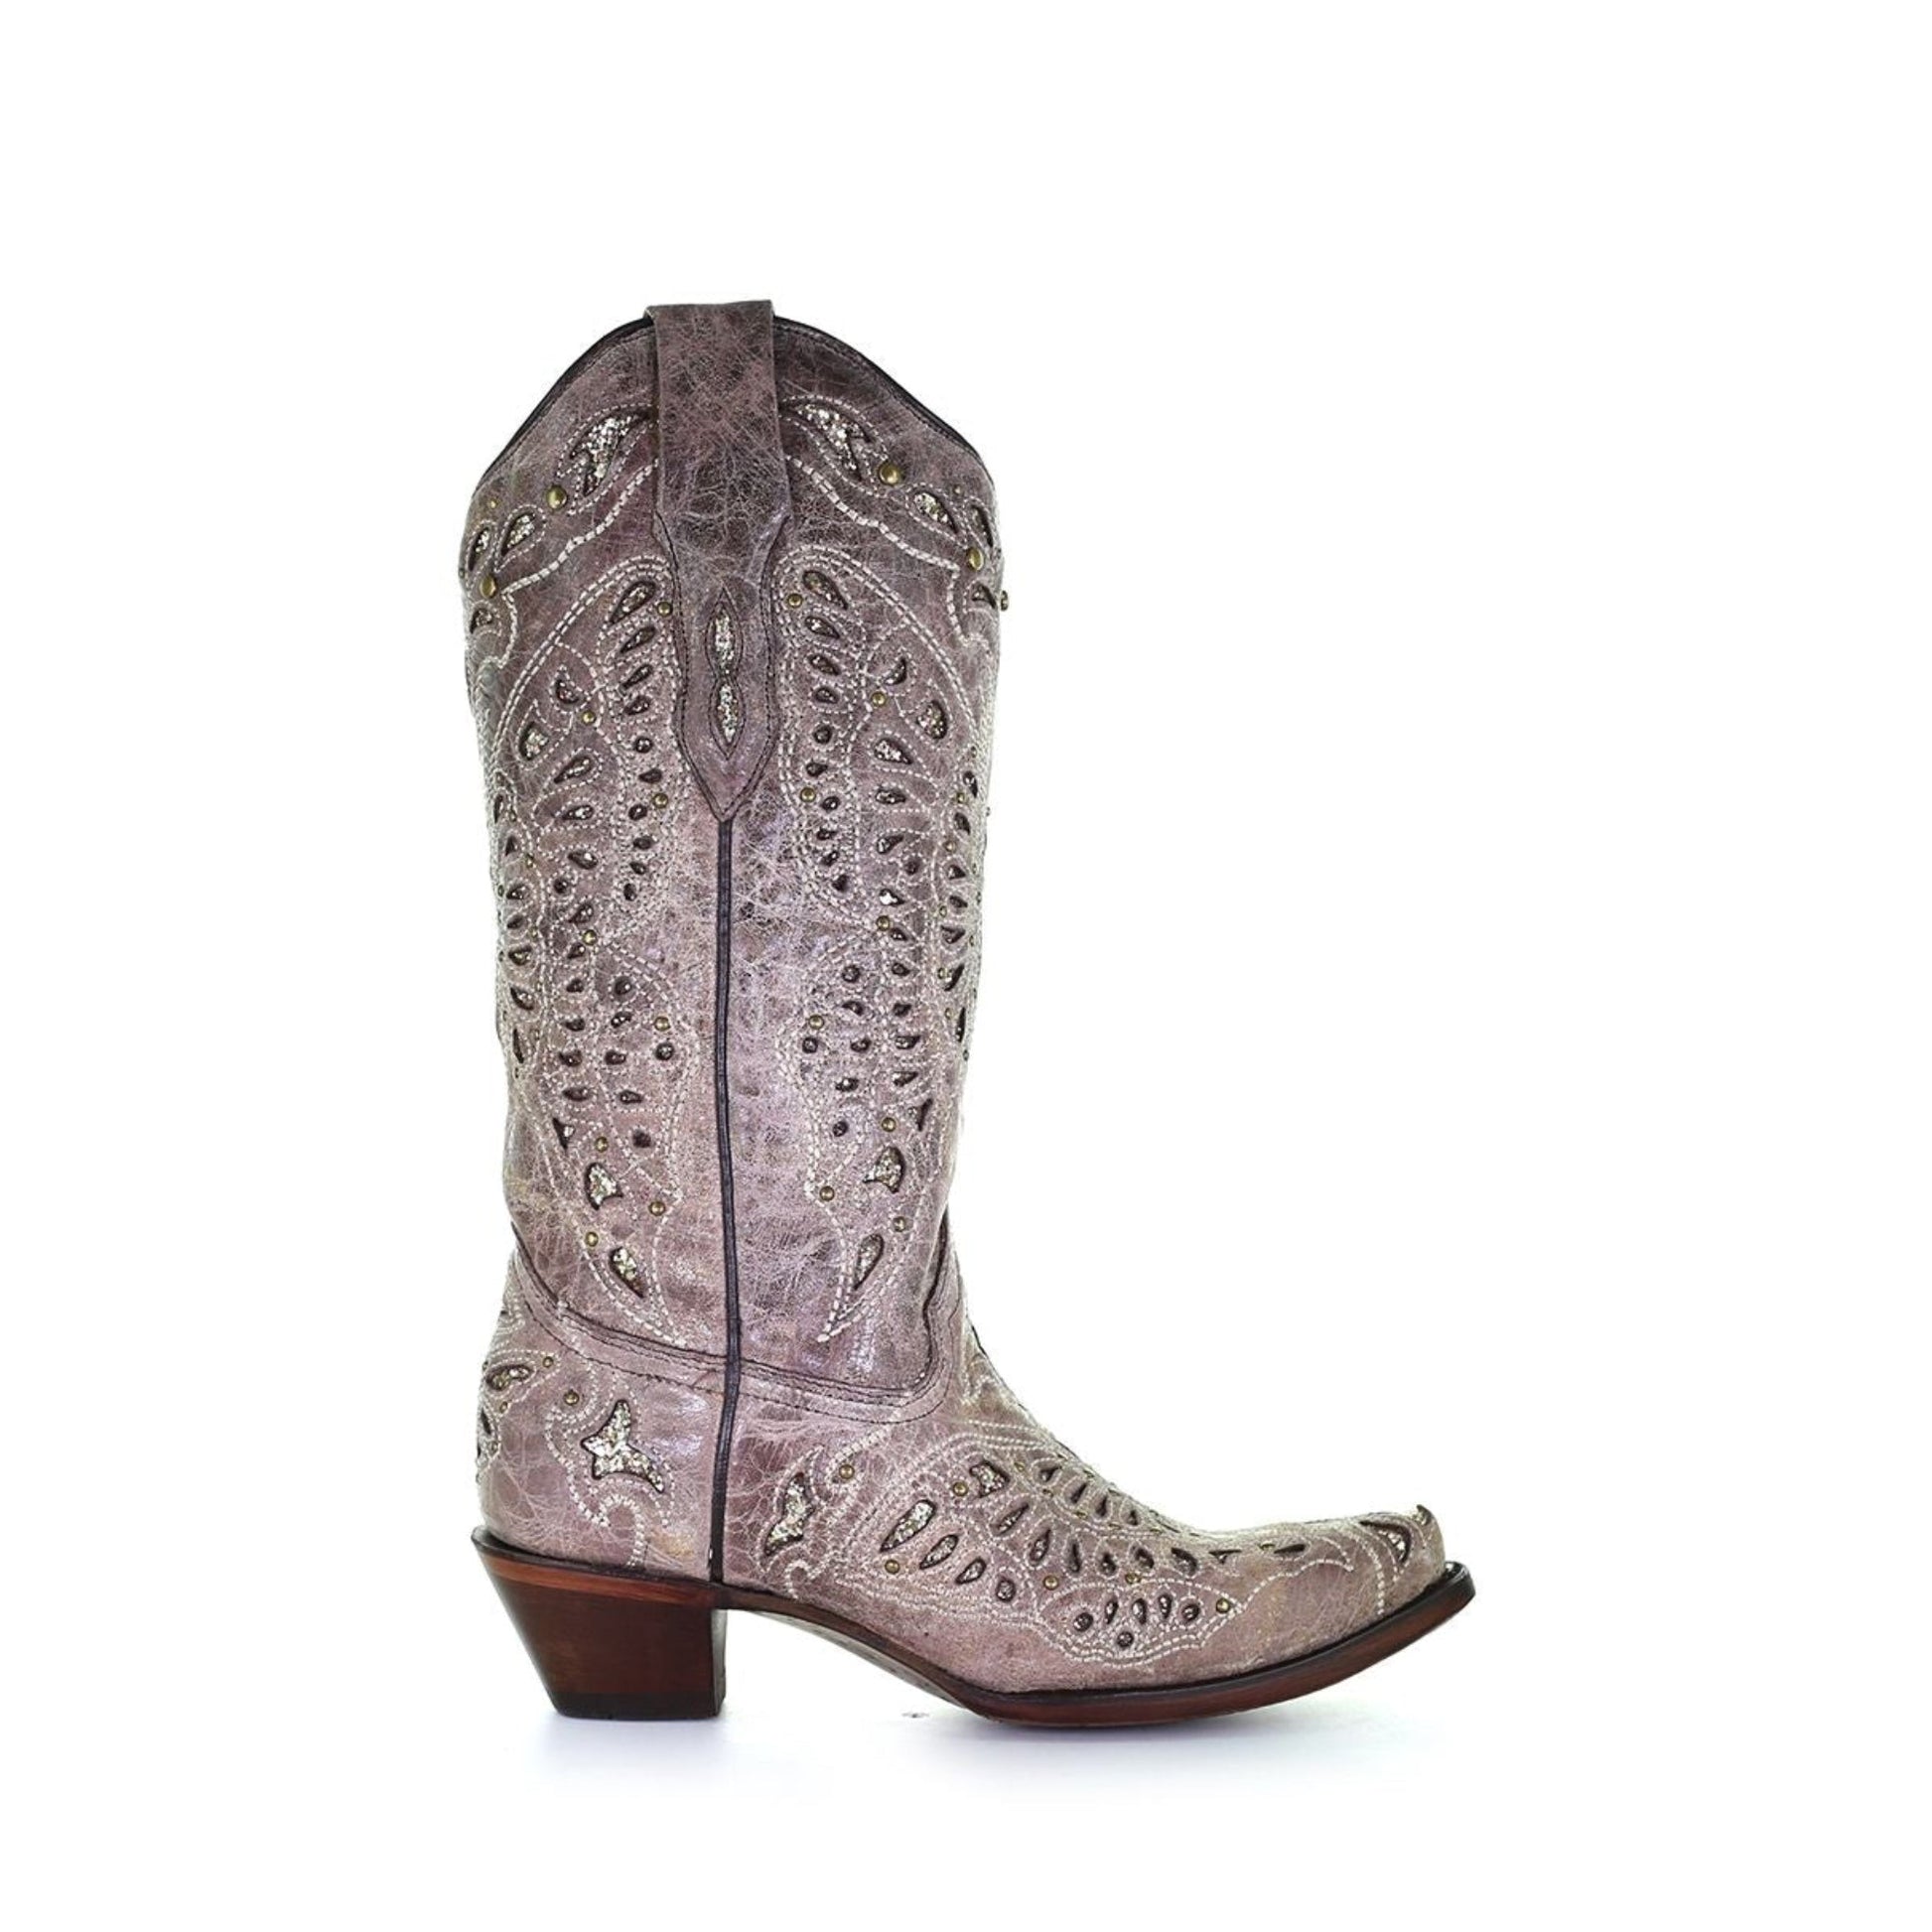 A4088 - Corral brown western cowgirl leather boots for women-Kuet.us